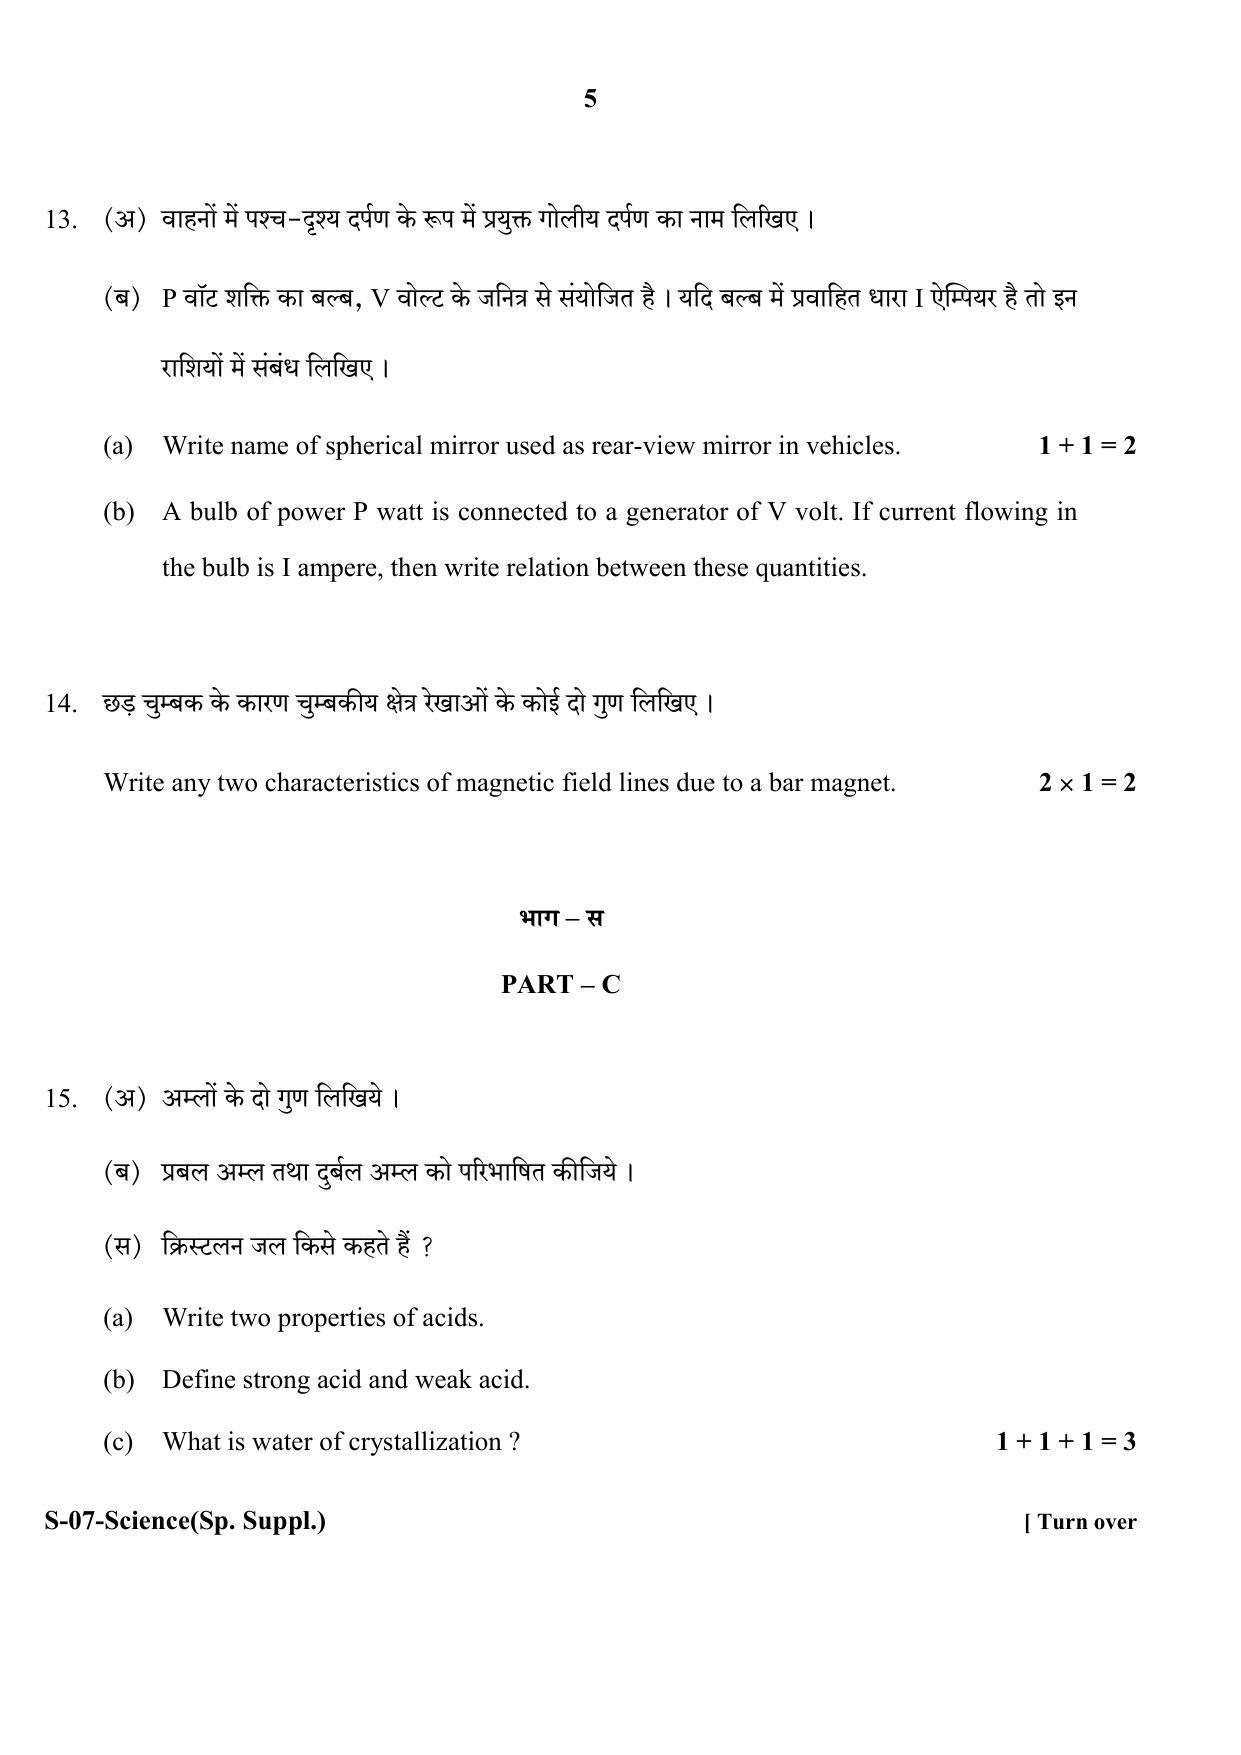 RBSE Class 10 Science ( supplementary) 2017 Question Paper - Page 5